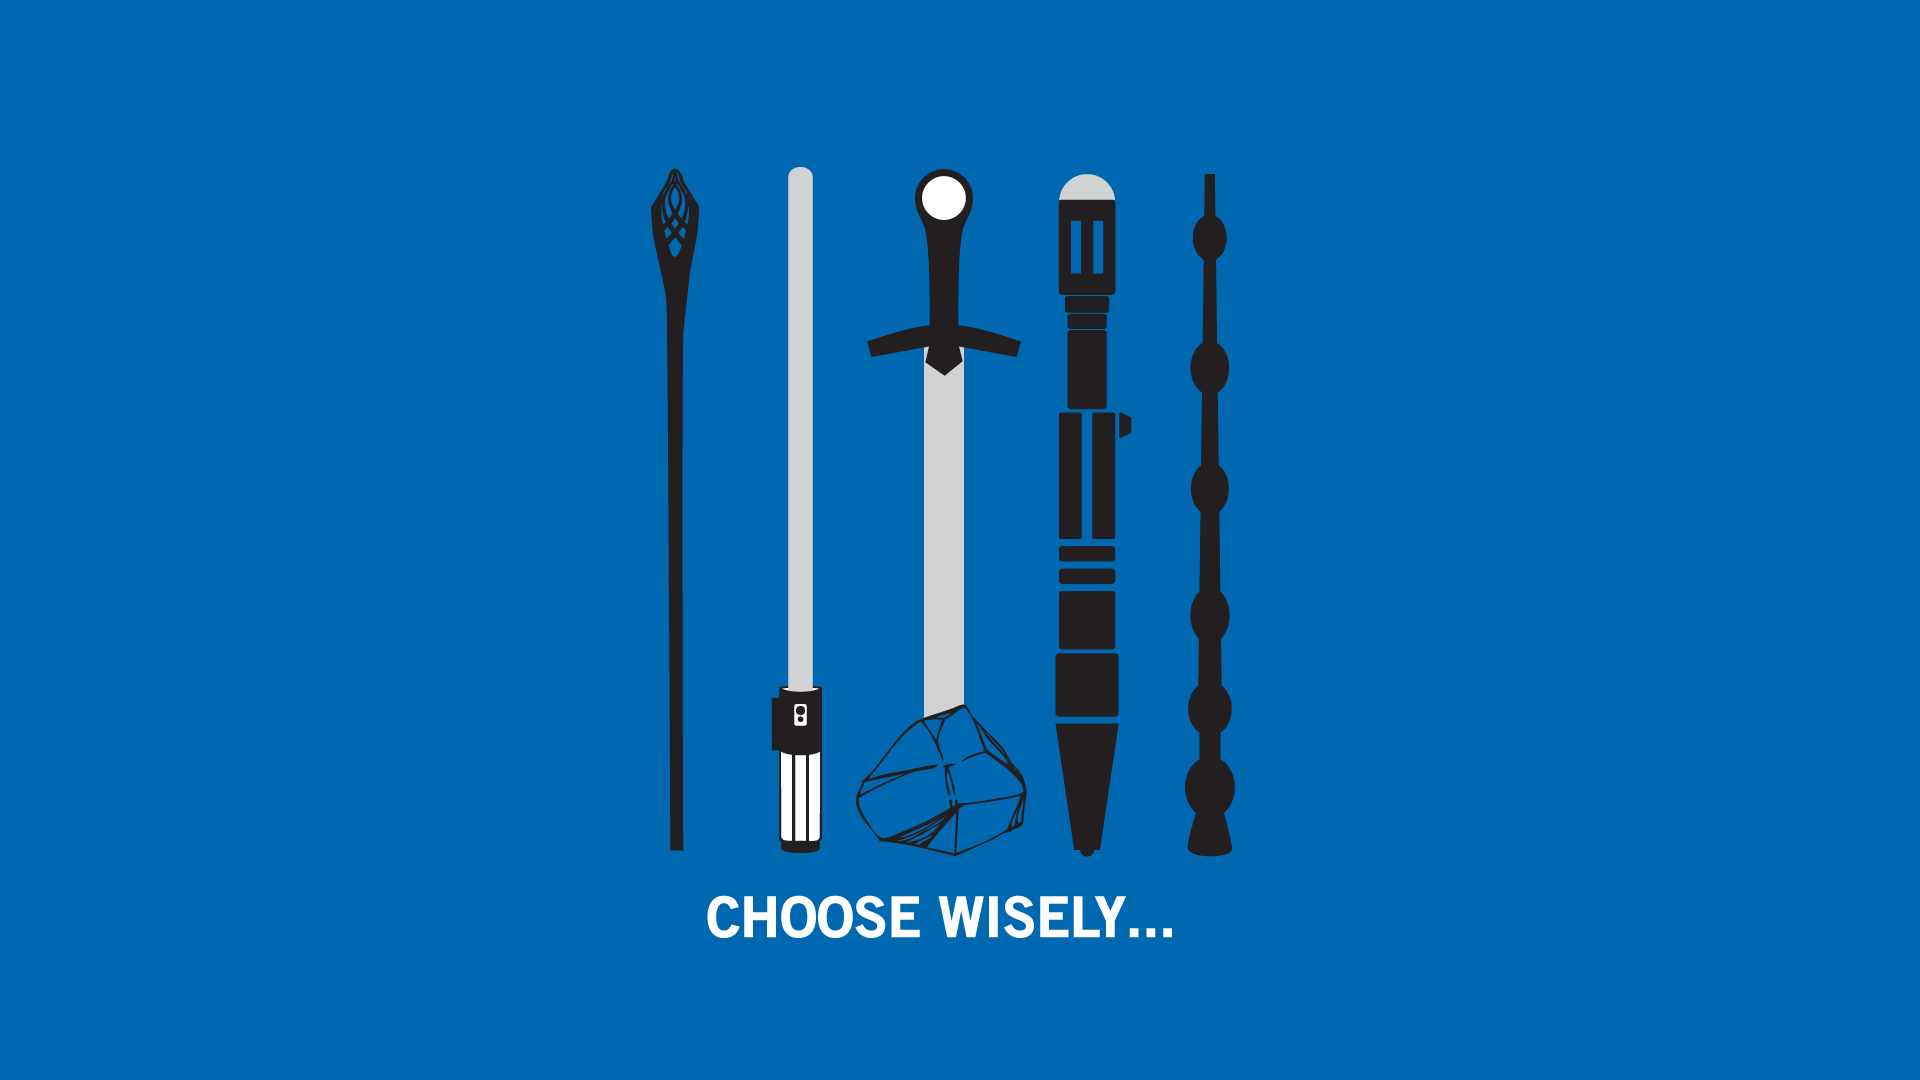 General 1920x1080 The Lord of the Rings Star Wars Excalibur Harry Potter Doctor Who weapon minimalism blue background humor military war movies sword